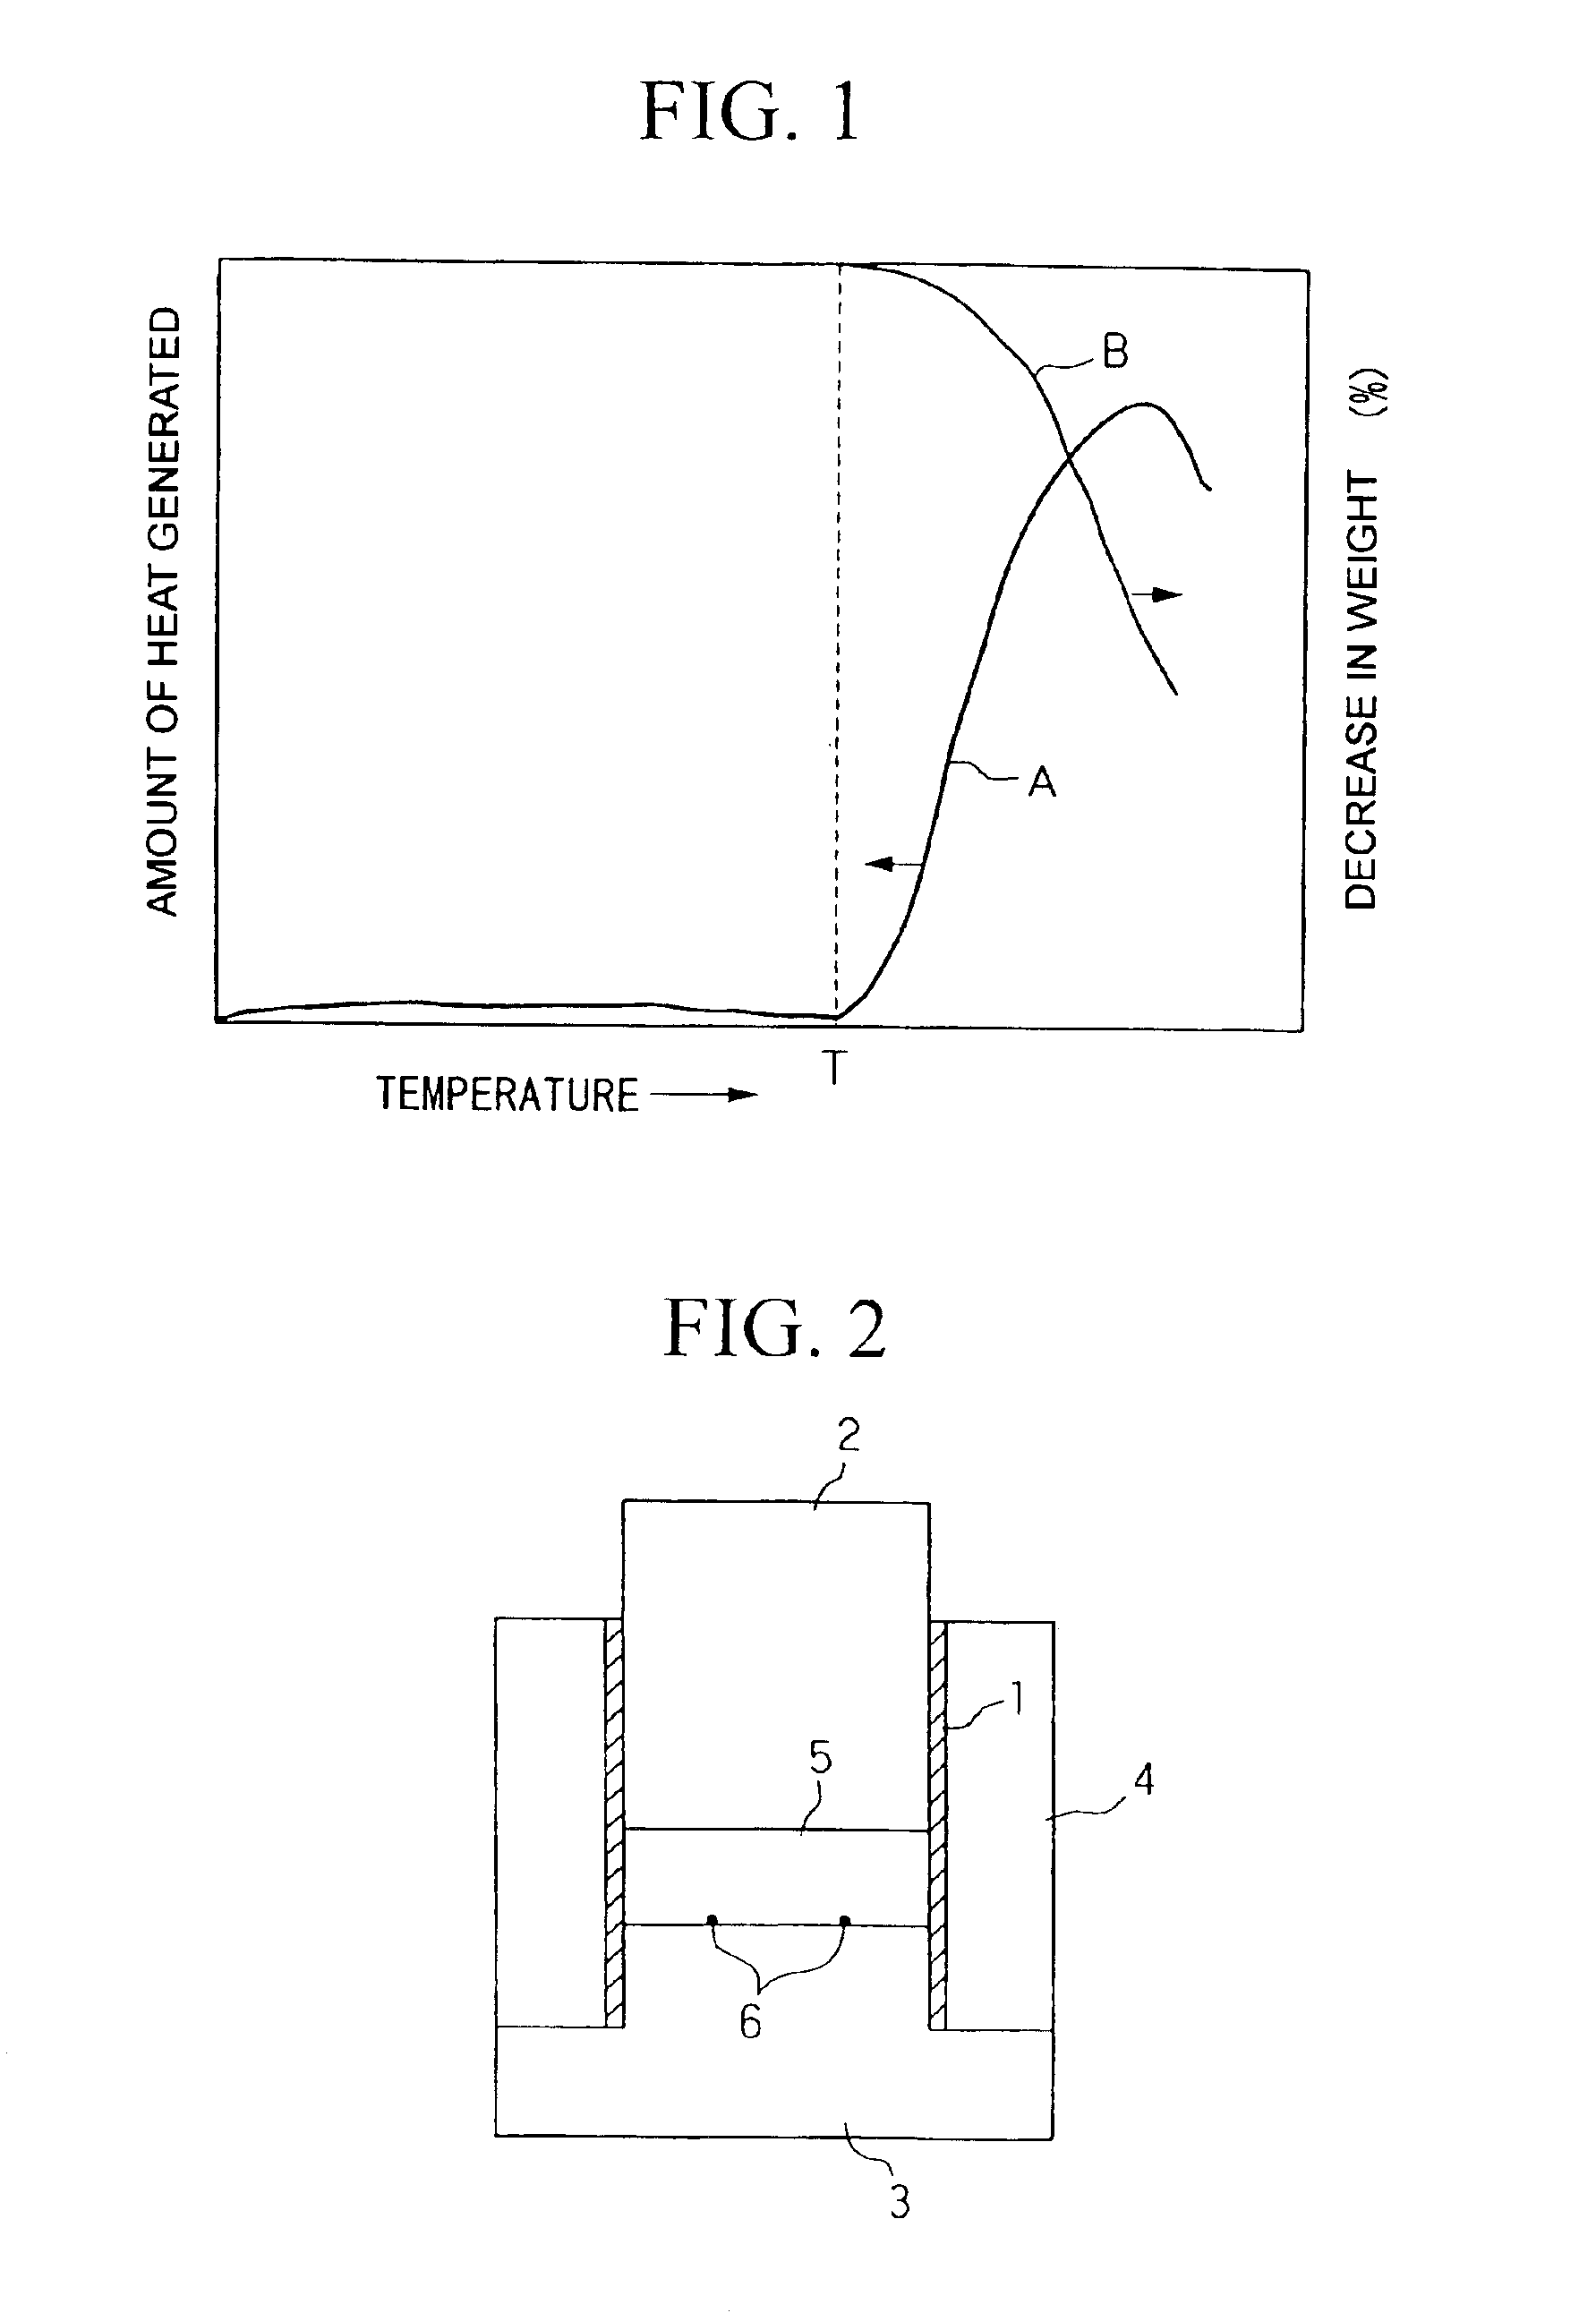 Carbonaceous material for cell and cell containing the carbonaceous material